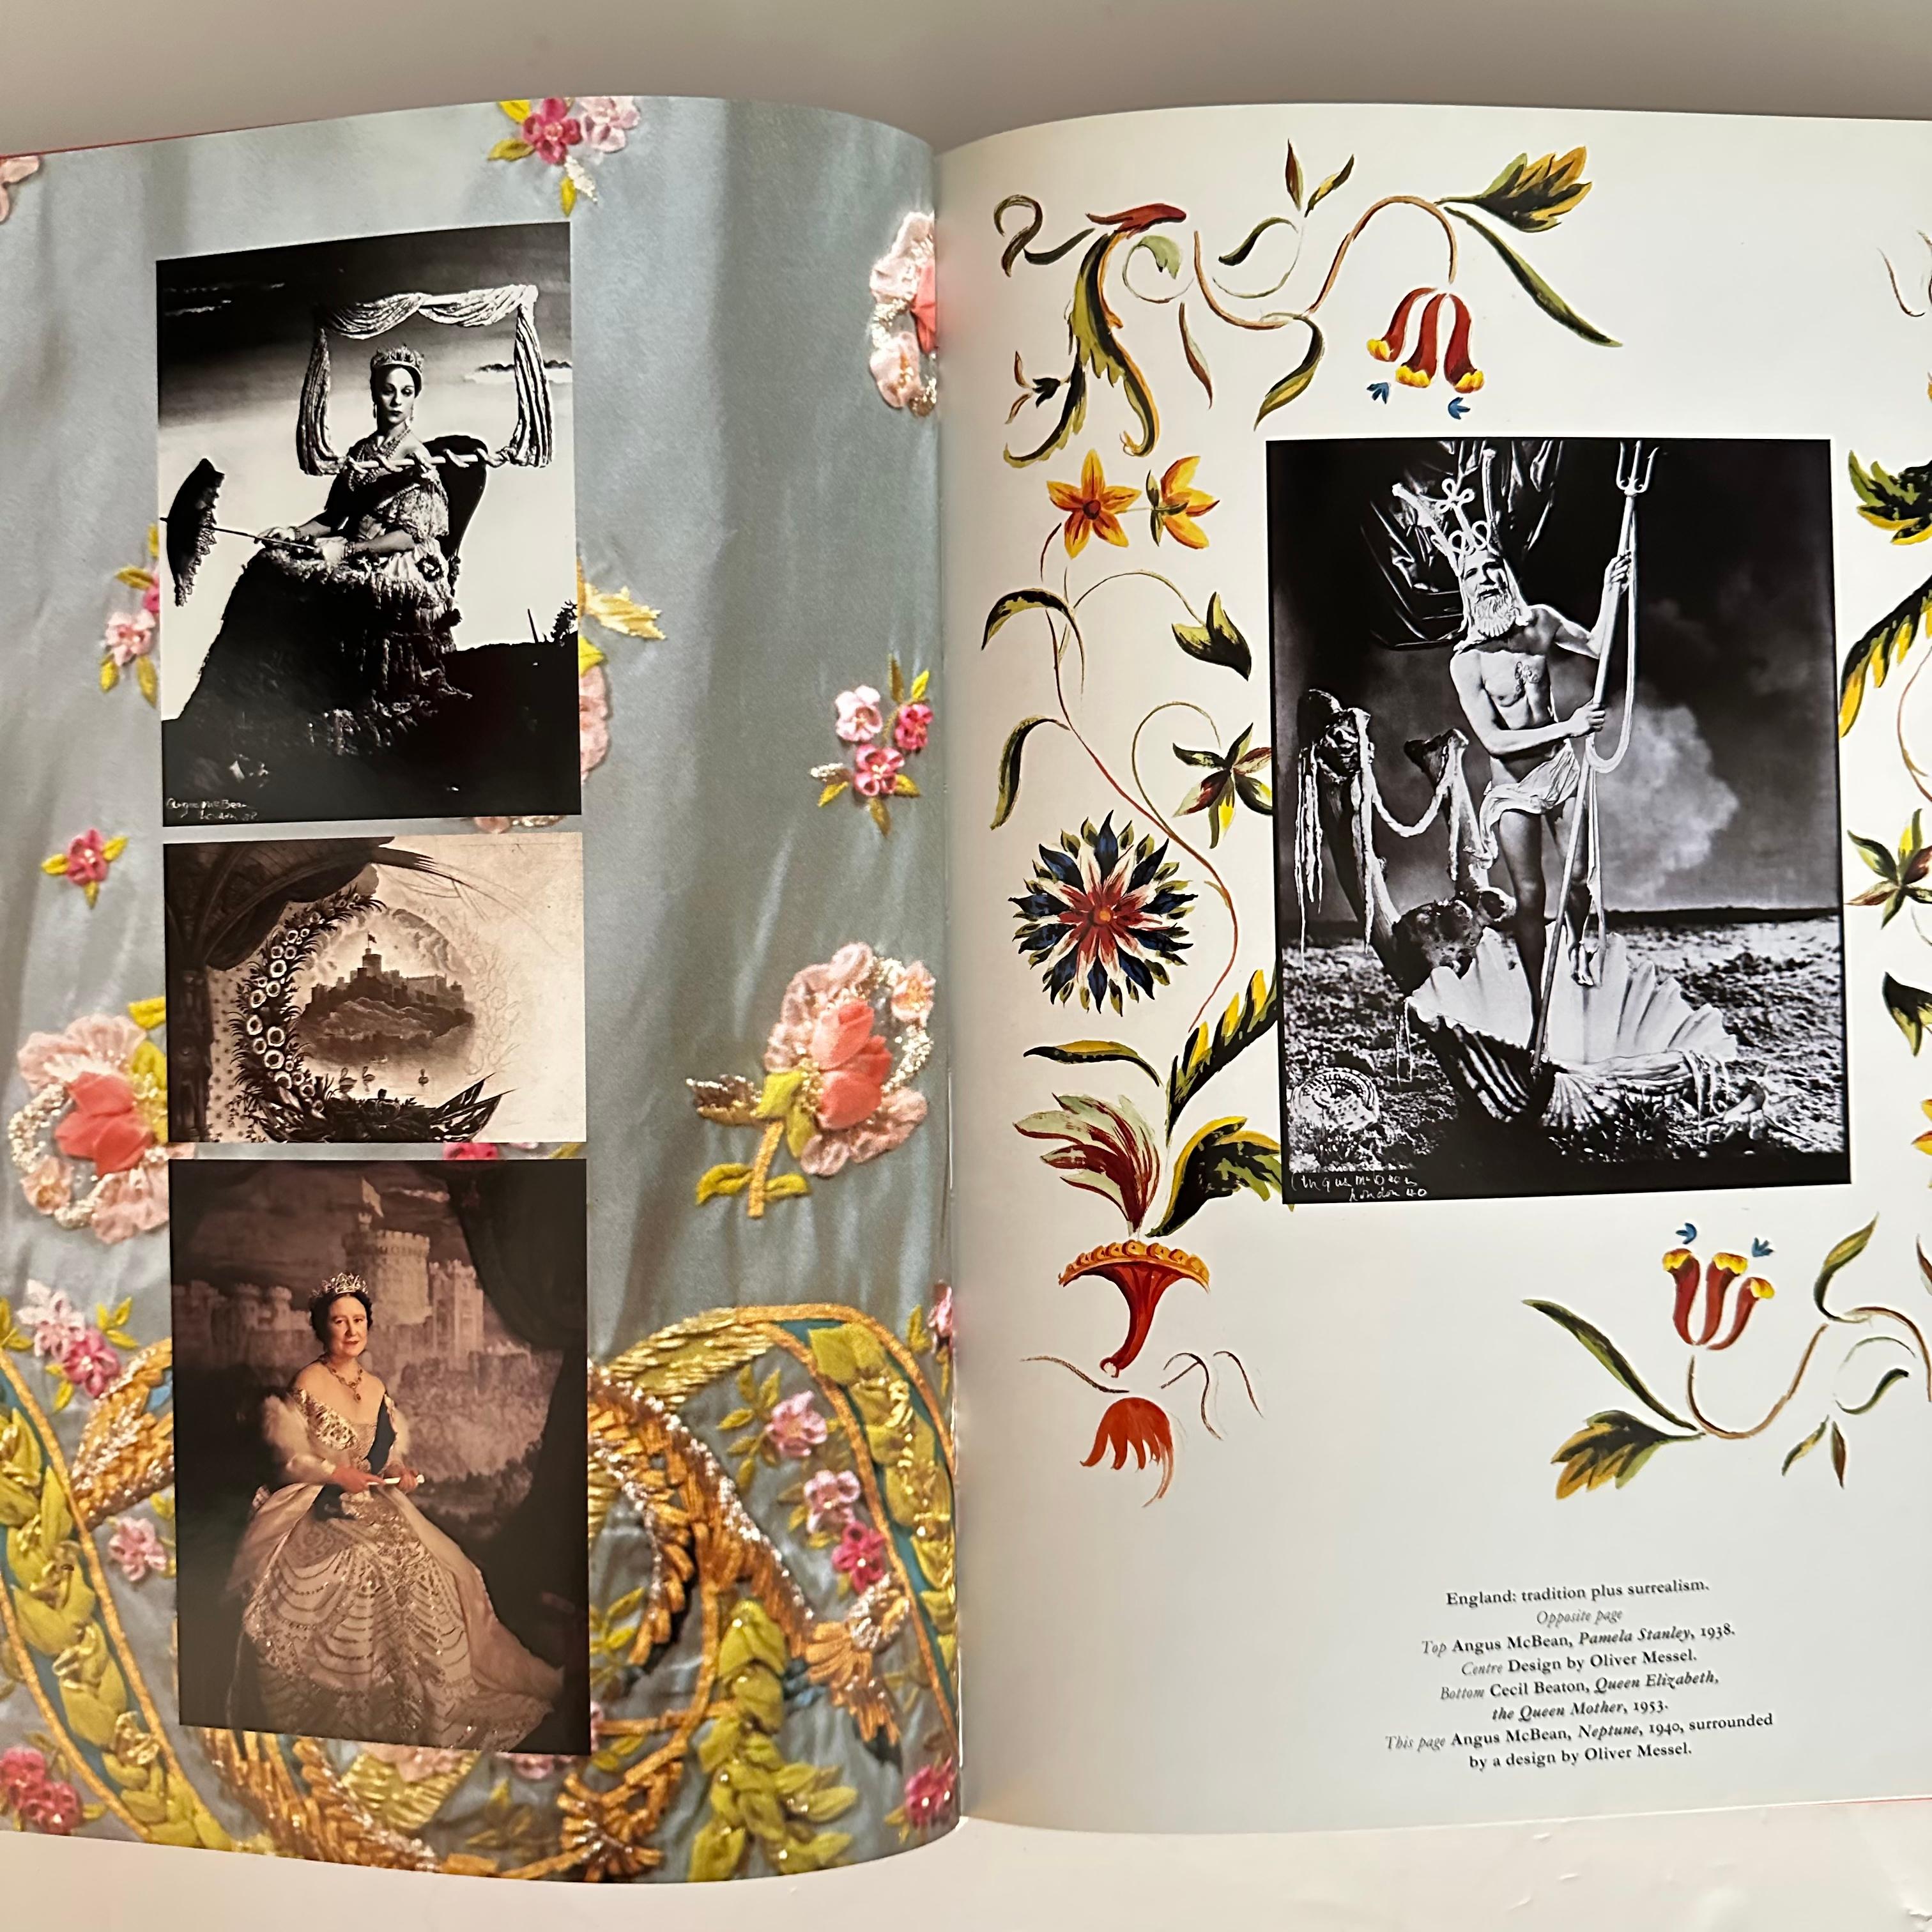 Published by Thames & Hudson, 1st English edition, London, 1992. Hardback with English text translated from French. 

Lacroix, the legendary couturier, a sensualist and an aesthete, sported a signature mélange of elements from the theatre, the